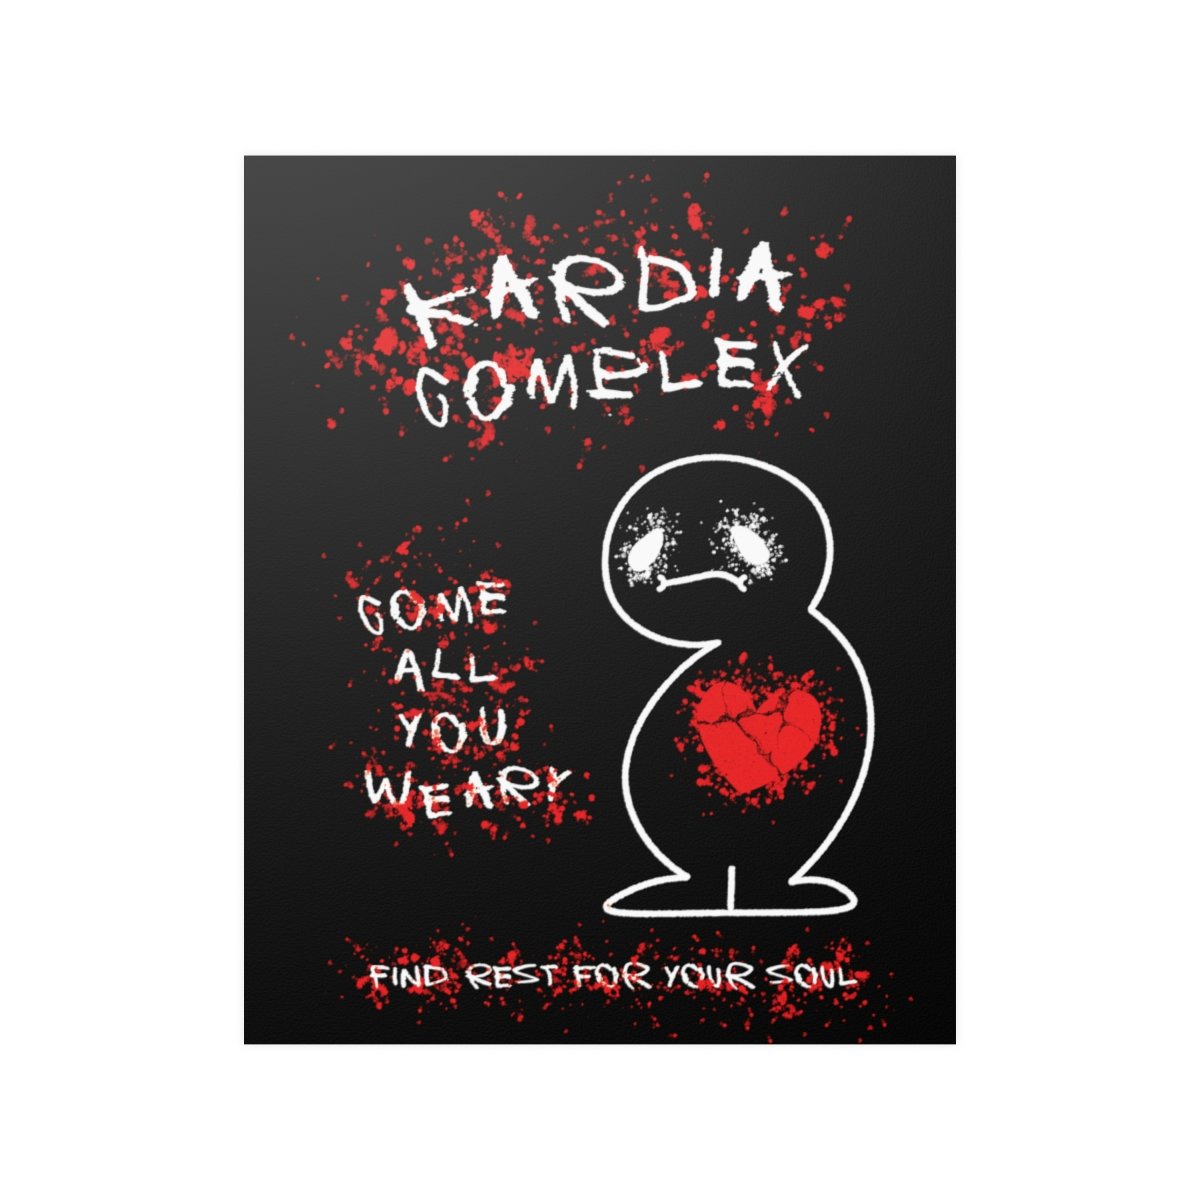 Kardia Complex – Come All You Weary Posters